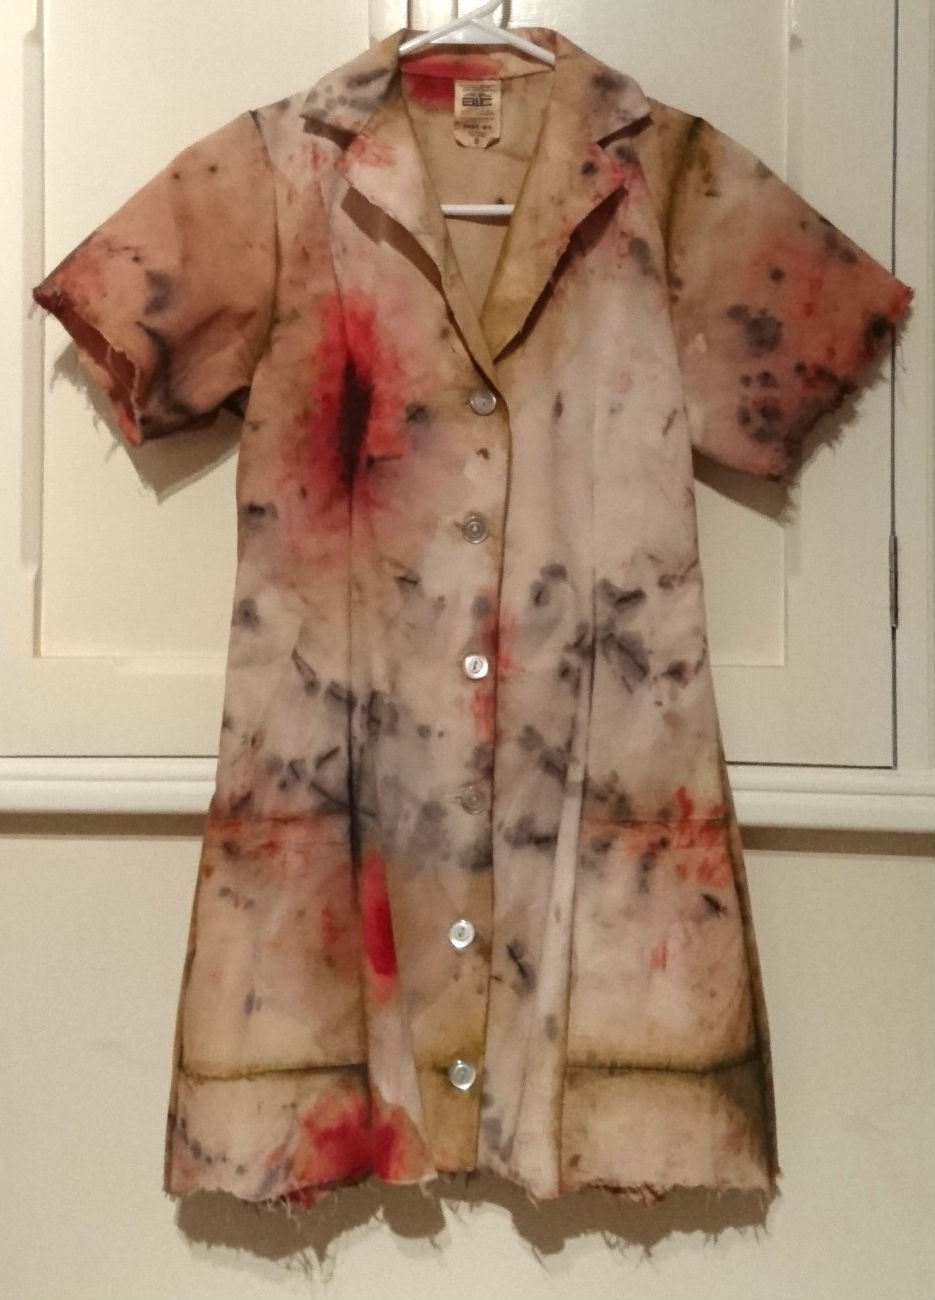 Zombie Costume DIY
 How To Dress As A Zombie For Halloween A bud